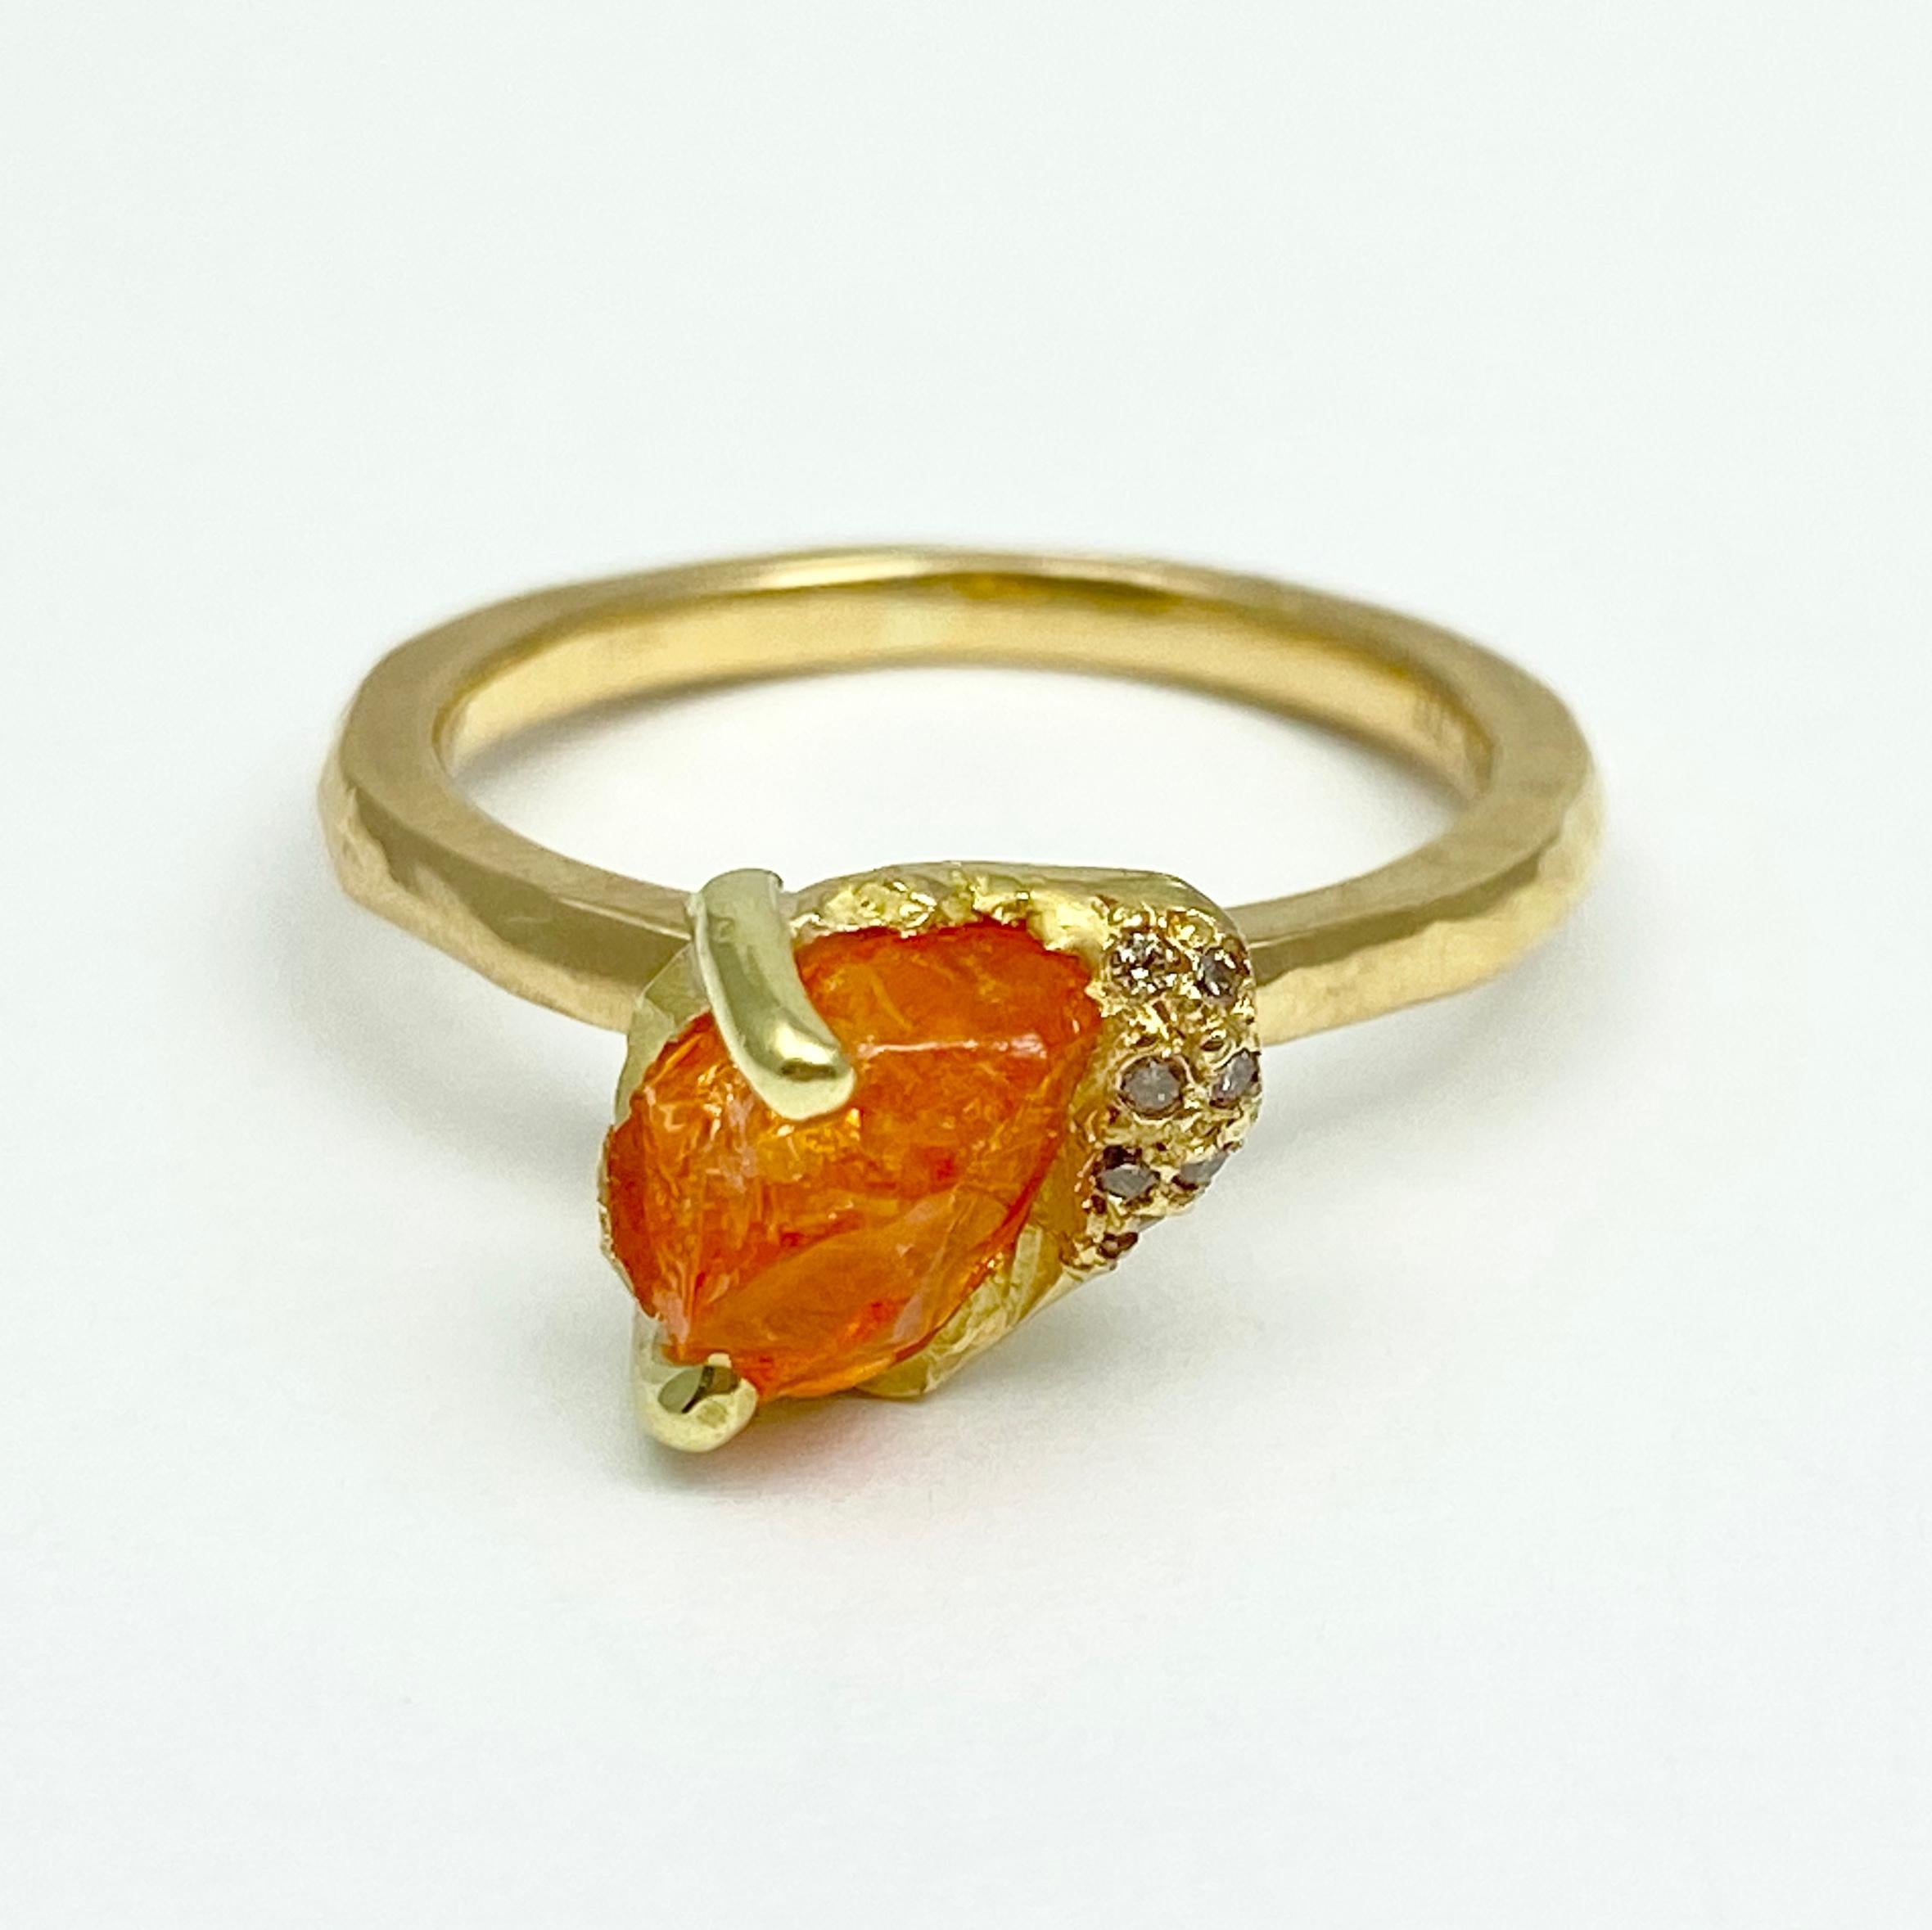 The Gee ring, from our Watu Collection, is hand-crafted with 18-karat recycled yellow gold, and features one untreated, Tenda Cut, natural orange color spessartine garnet (also called spessartite); and seven round champagne accent diamonds. Designed